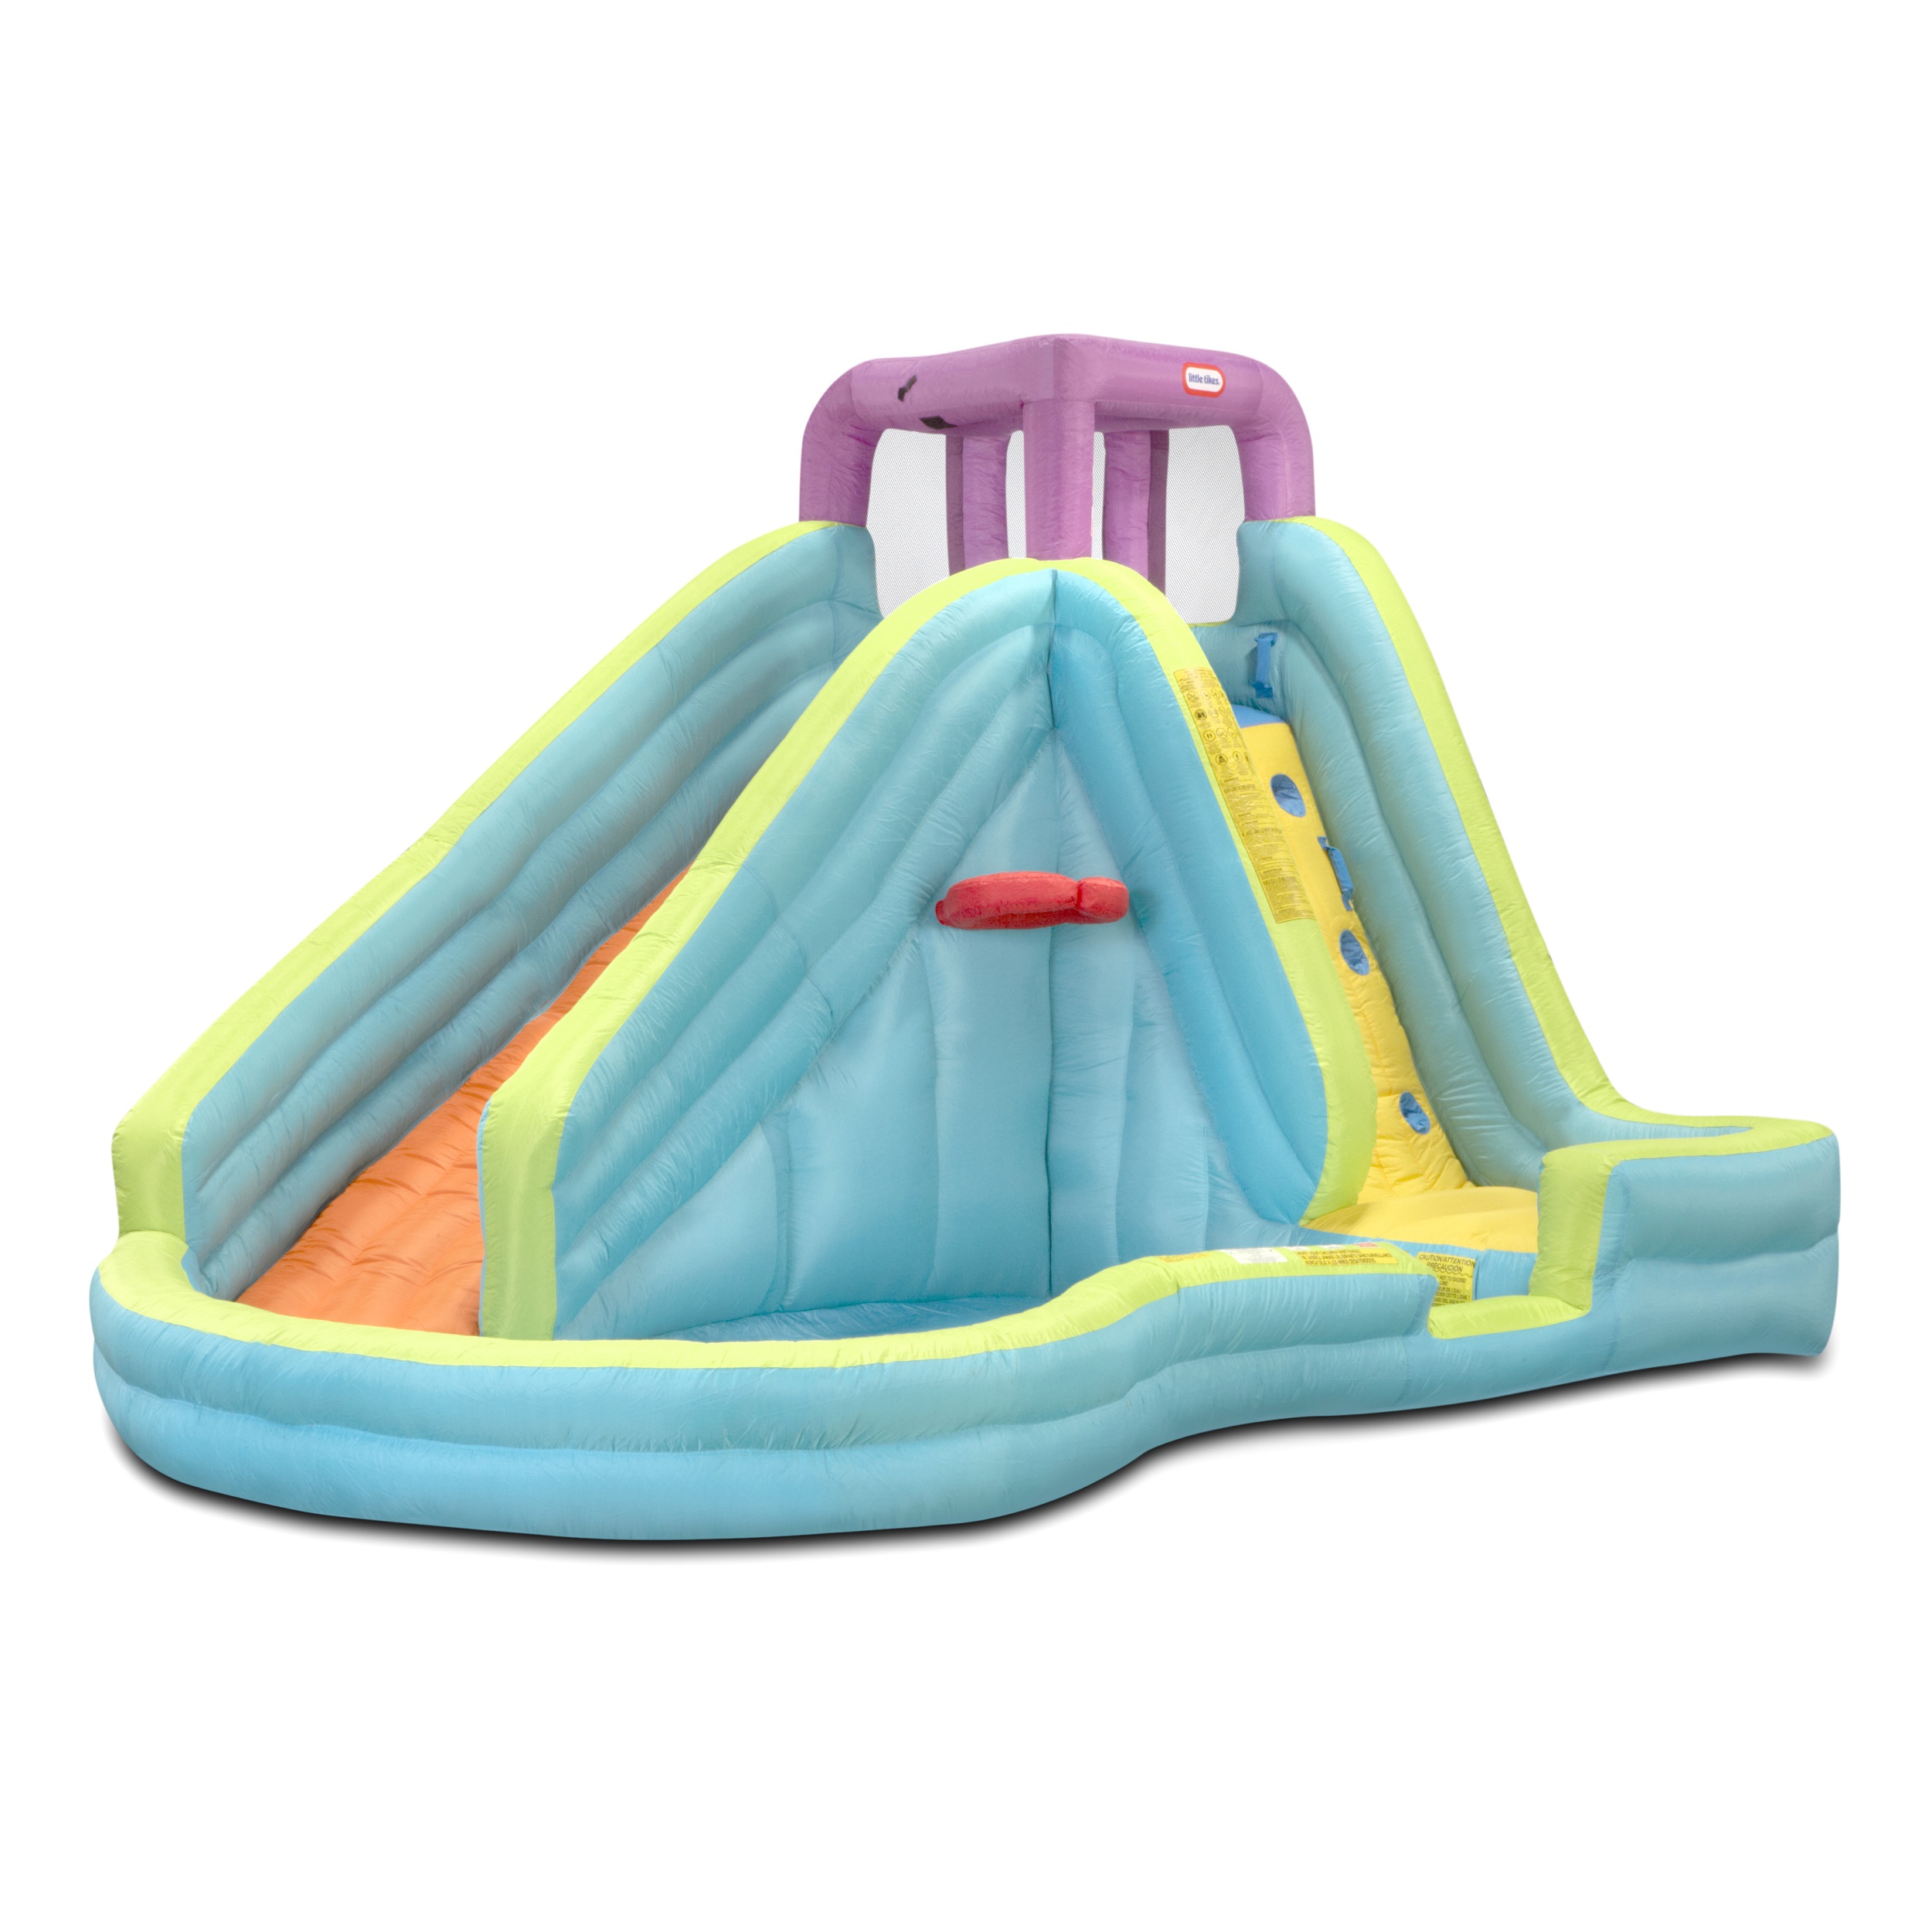 Little Tikes Slam 'n Curve Inflatable Water Slide with Blower - image 1 of 12